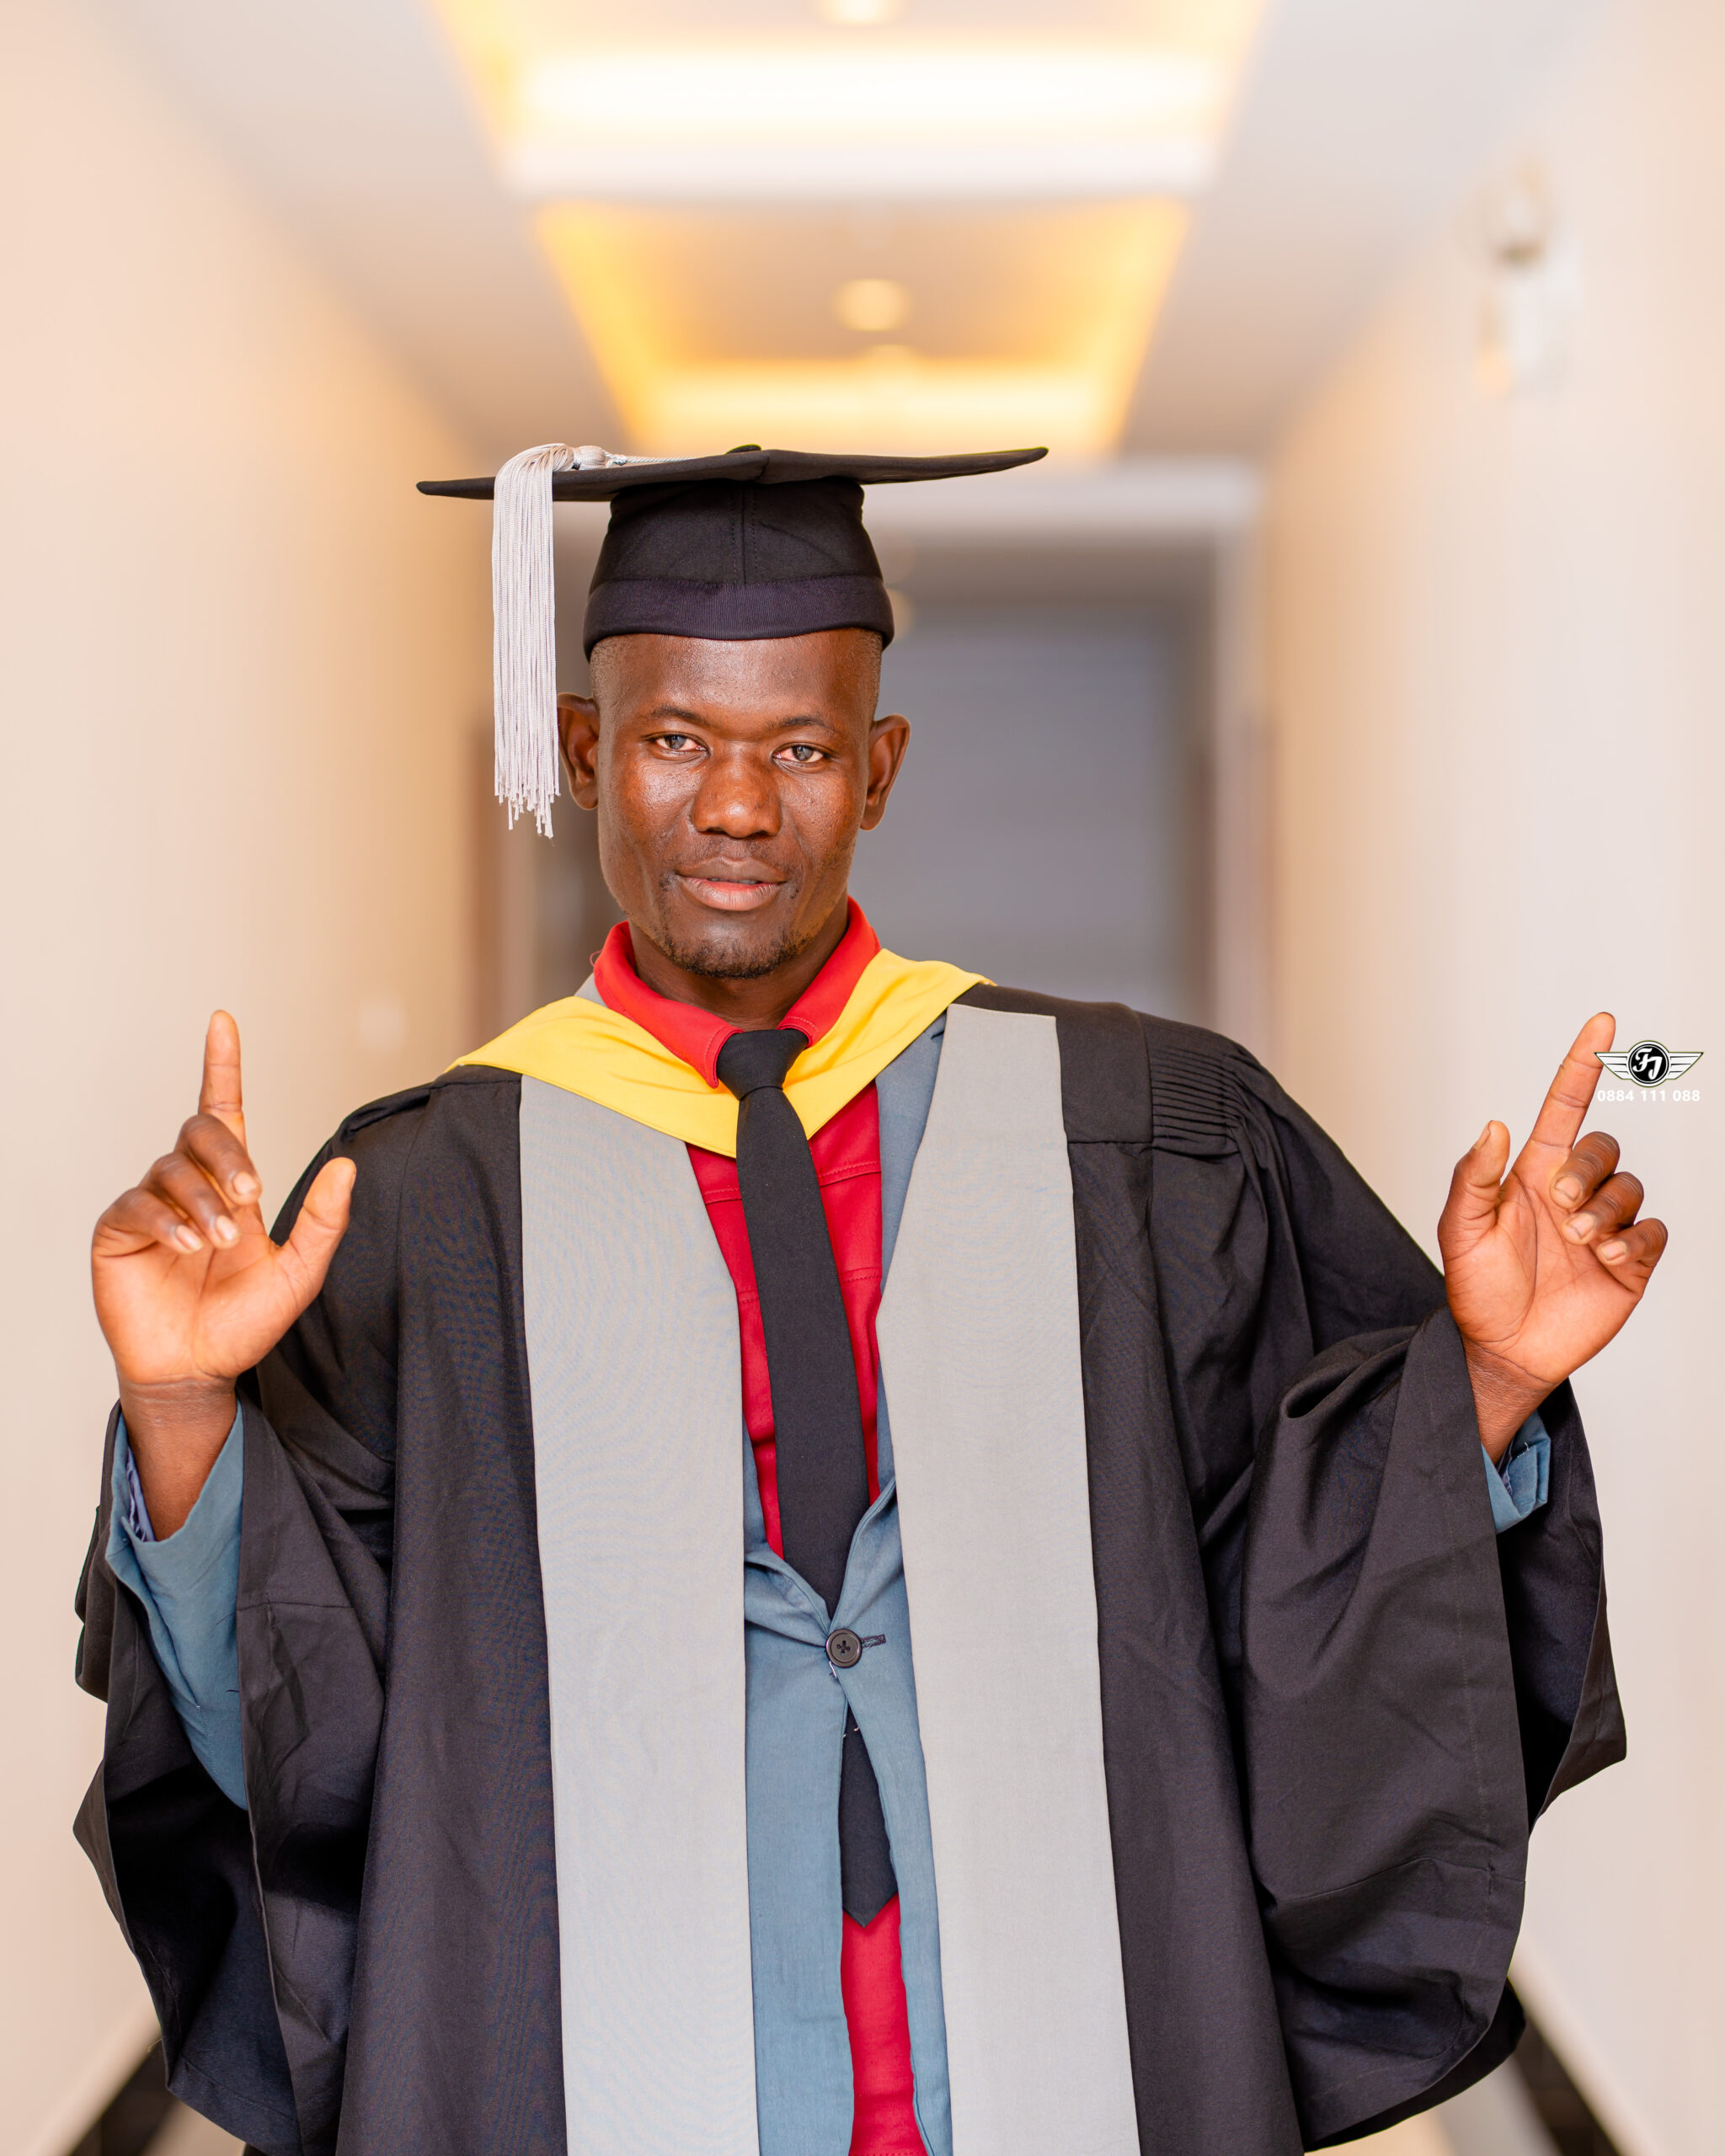 Sponsored student Alick Nathan poses in a white hallway. He is wearing a graduation robe and cap.